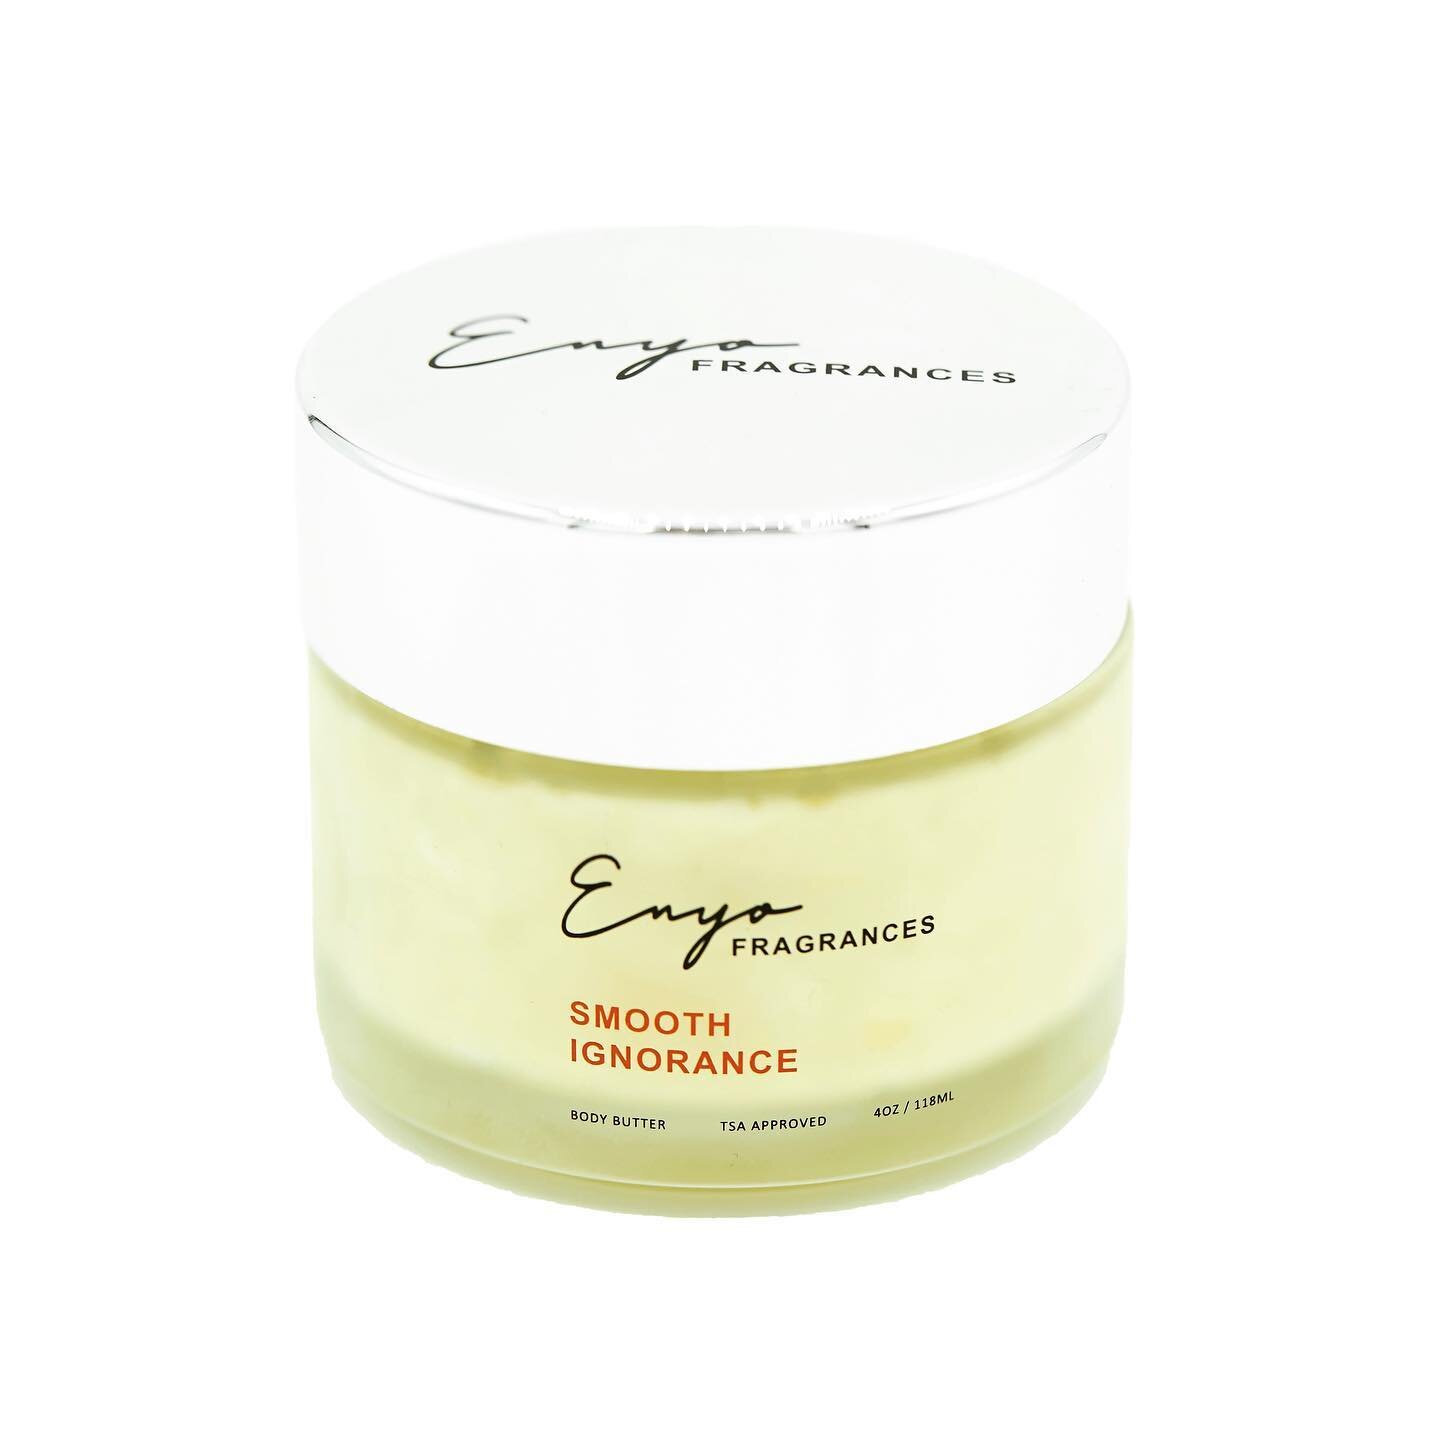 &ldquo;Smooth Ignorance&rdquo; Body butter by Enyo Fragrances 

With a combination of a Rosehip, aloe vera and other cold pressed essential oils, Enyo Fragrances body butter will lock in moisture, while leaving your skin smooth and with a luxurious a